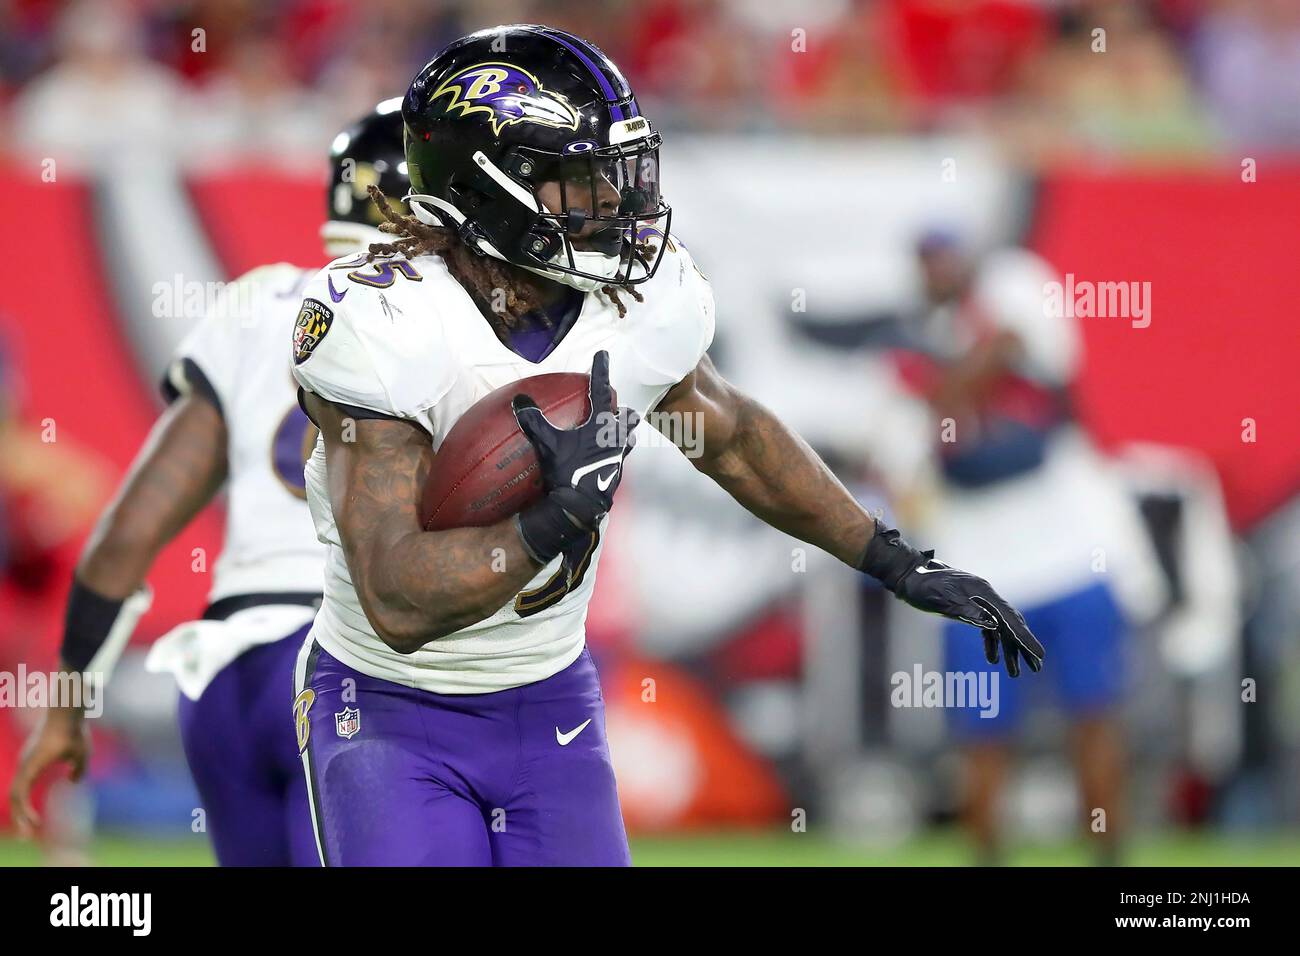 TAMPA, FL - OCTOBER 27: Baltimore Ravens running back Gus Edwards (35)  carries the ball during the regular season game between the Baltimore Ravens  and the Tampa Bay Buccaneers on October 27,